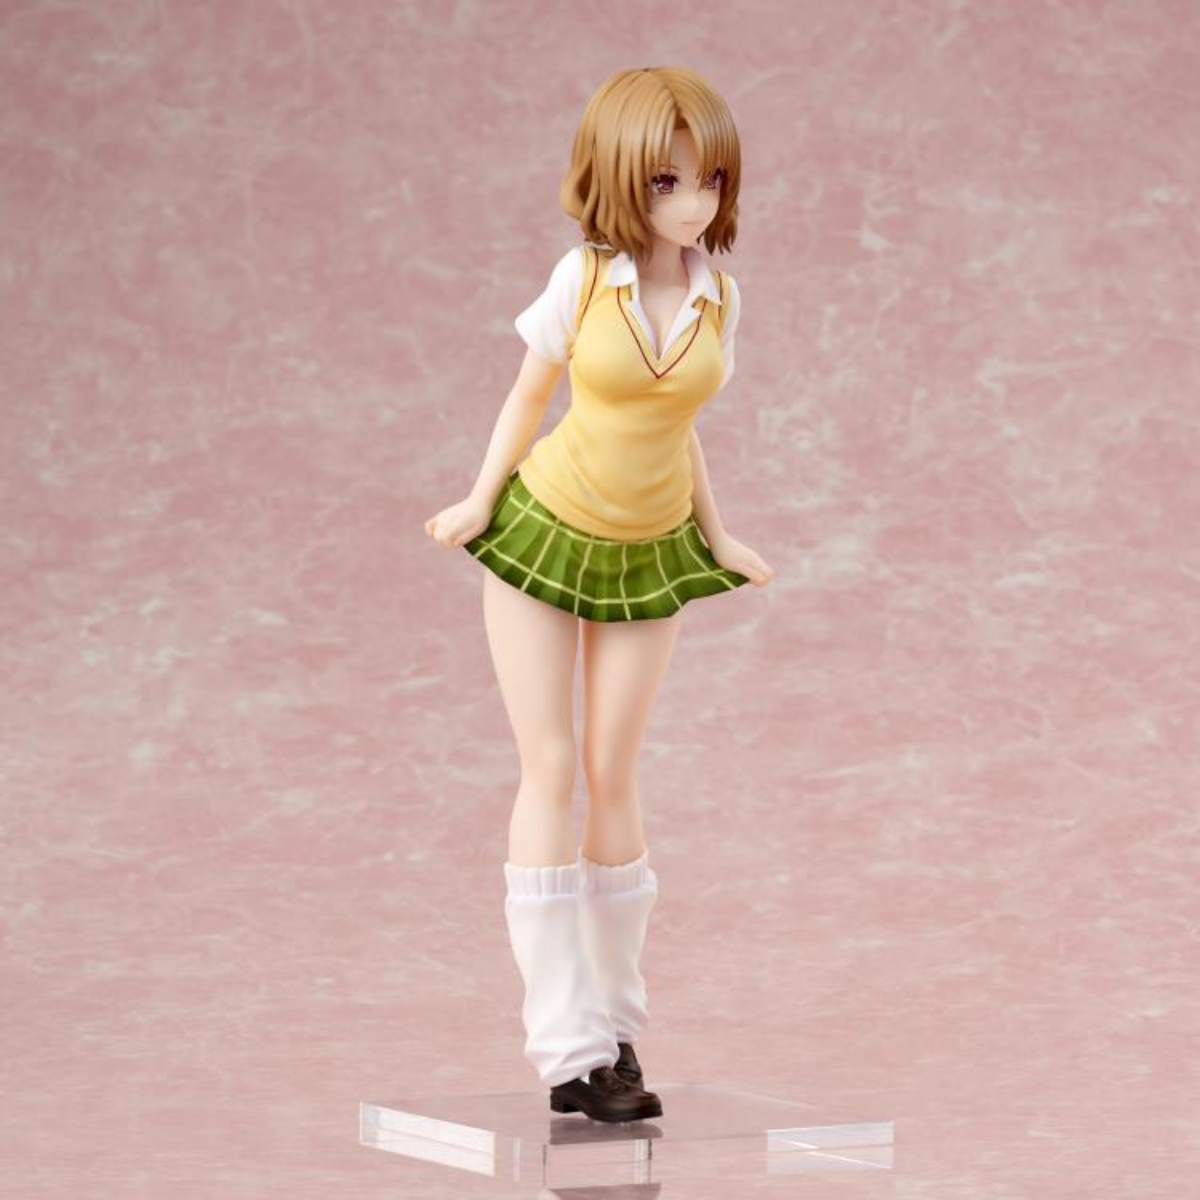 To Love Ru Darkness 1/6 Scale Figure "Mimioka Risa"-Union Creative-Ace Cards & Collectibles